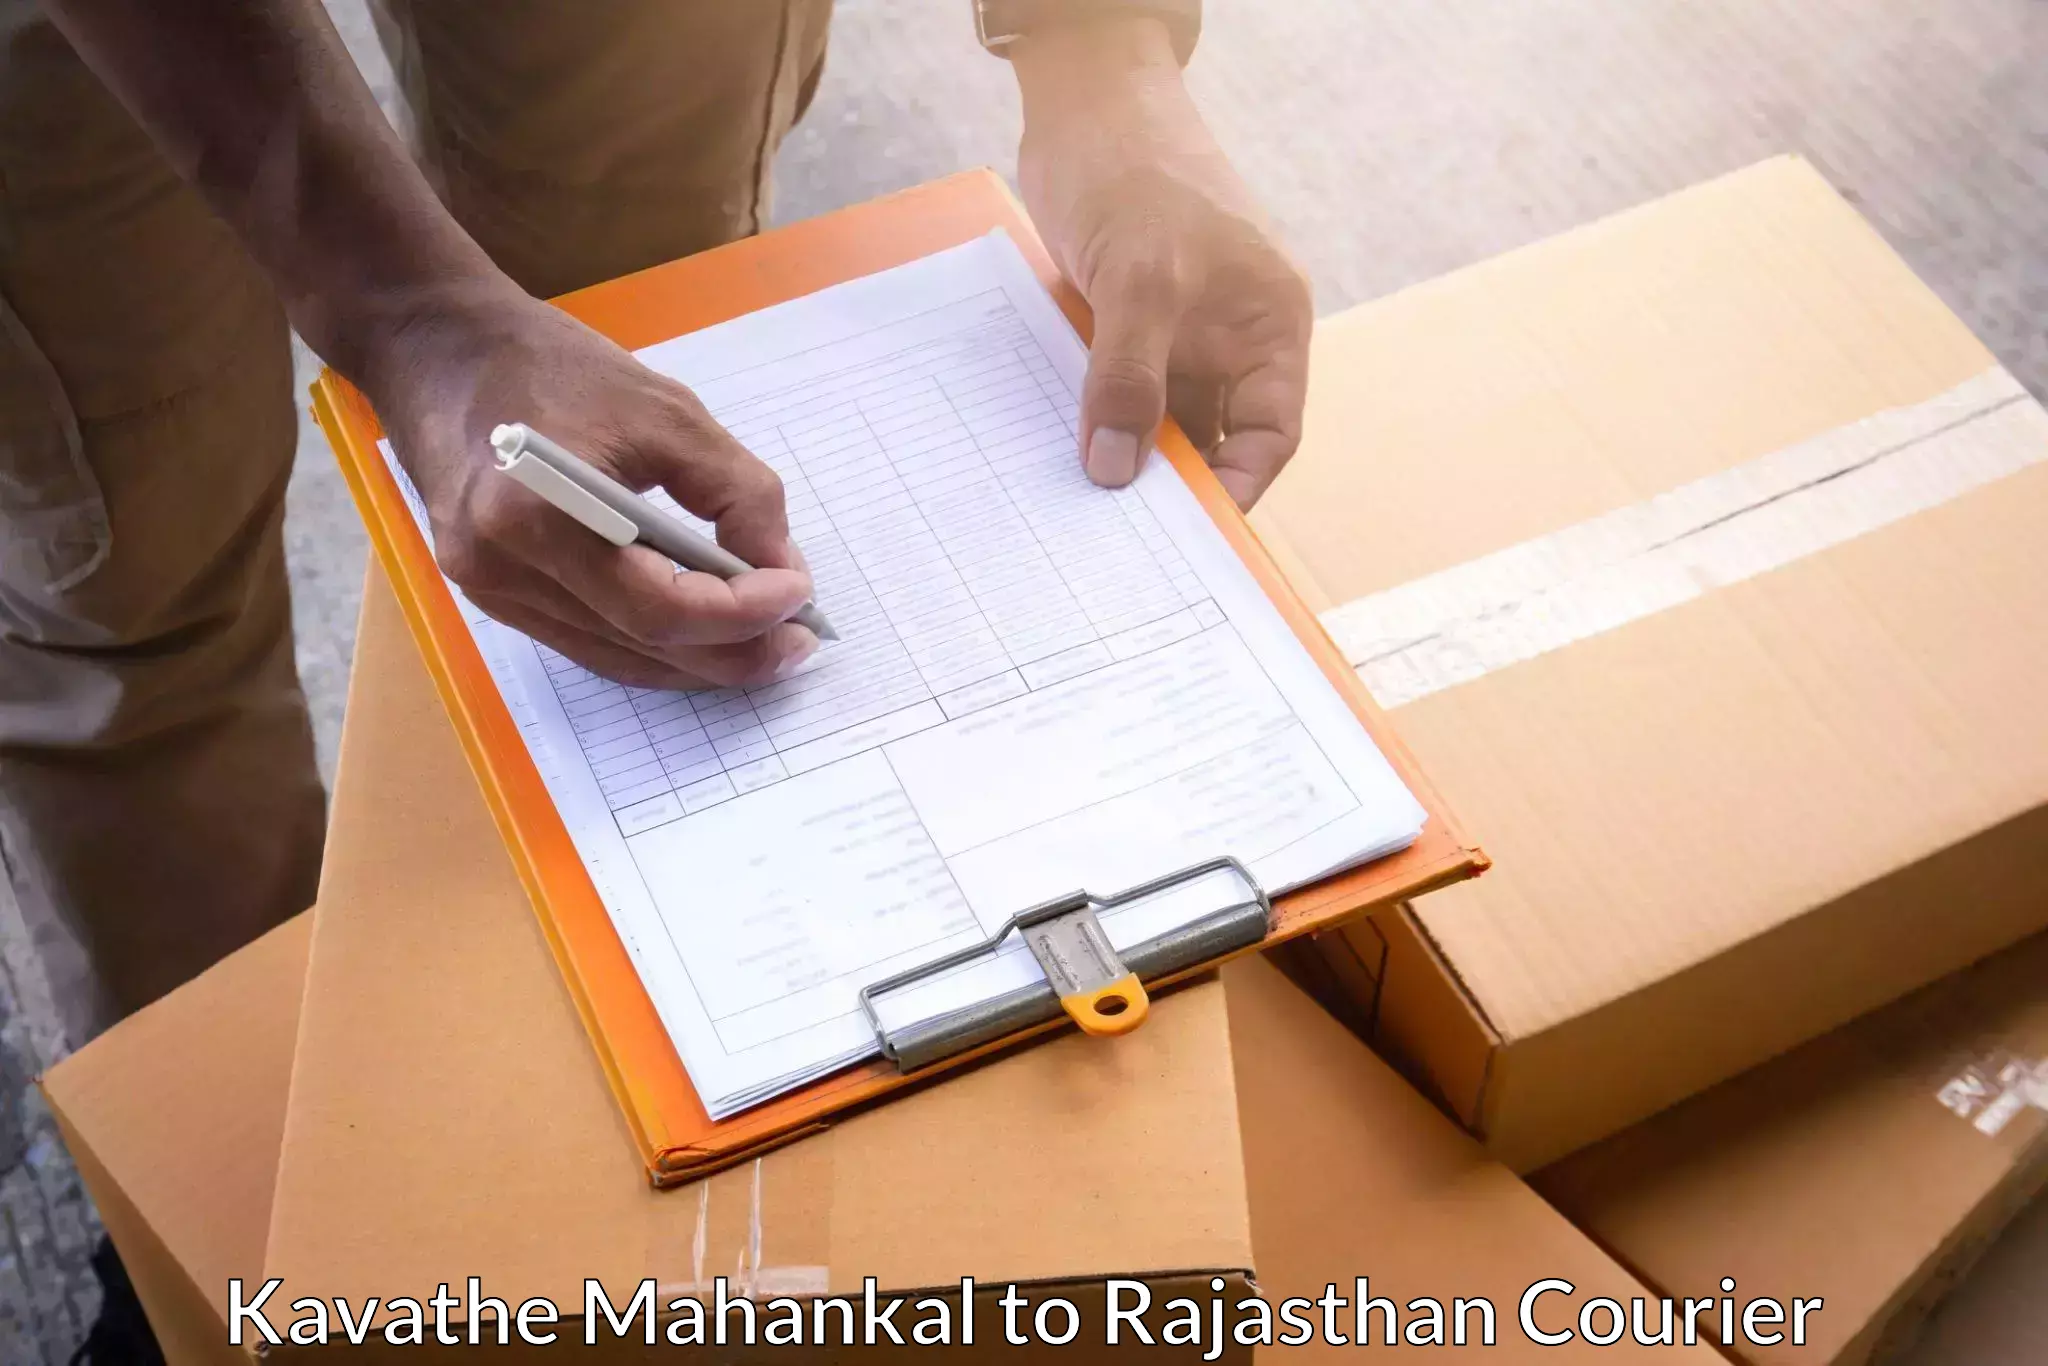 Reliable delivery network Kavathe Mahankal to Rajasthan